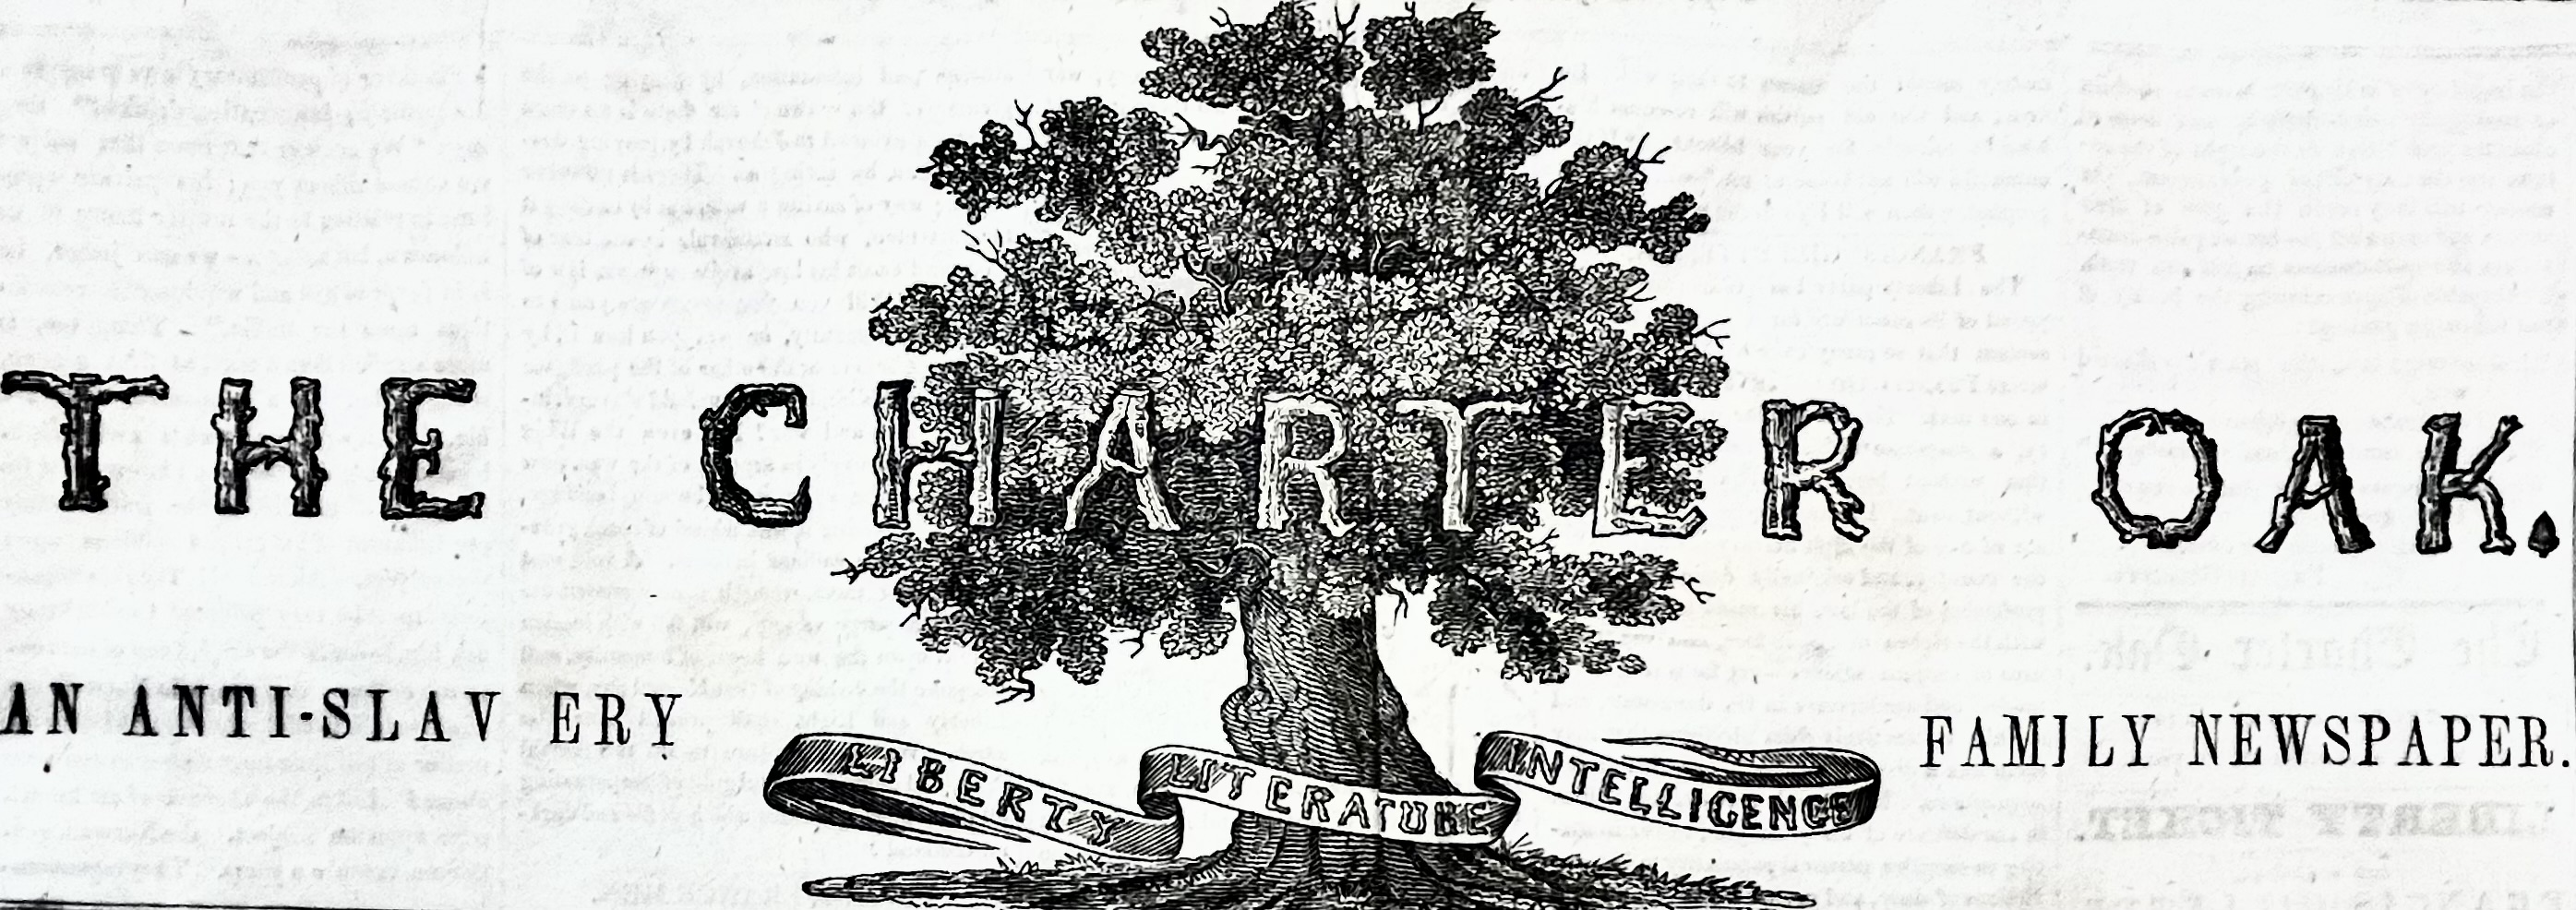 Charter Oak newspaper file, with motto "Liberty, Literature, Intelligence" on banner beneath the leafed-out oak.